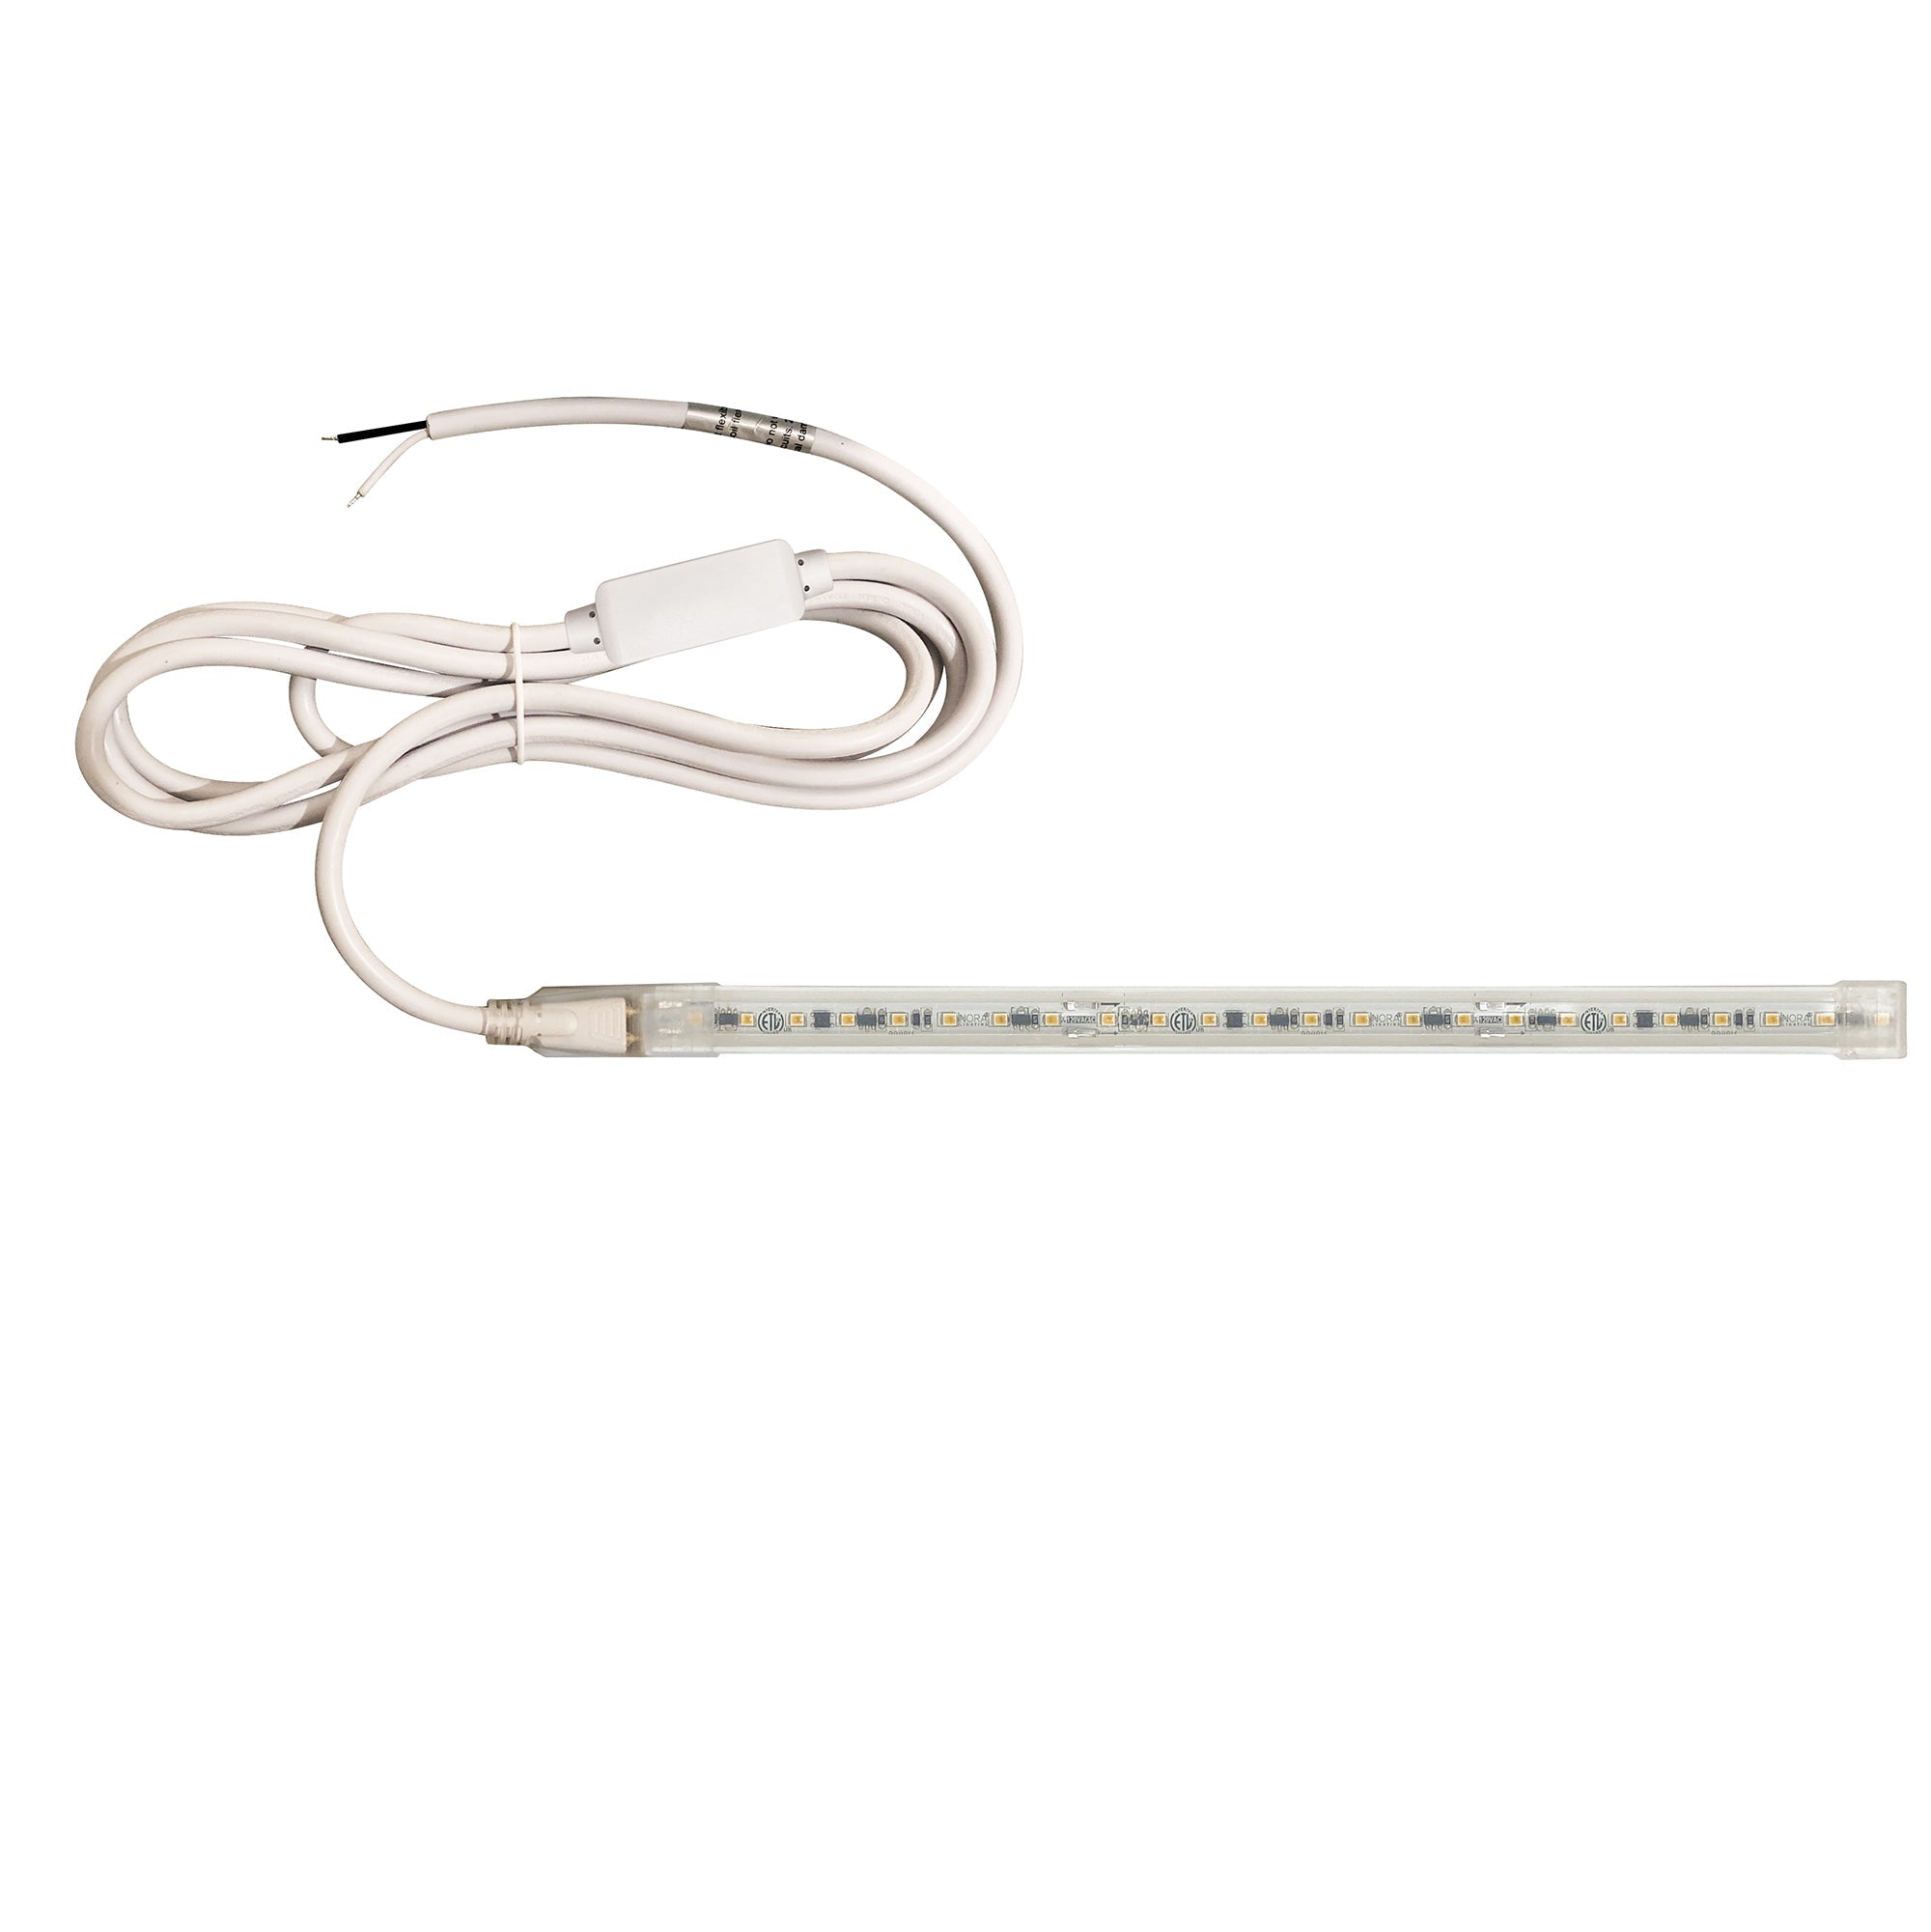 Nora Lighting NUTP13-W61-12-940/HWSP - Accent / Undercabinet - Custom Cut 61-ft 120V Continuous LED Tape Light, 330lm / 3.6W per foot, 4000K, w/ Mounting Clips and 8' Hardwired Power Cord w/ Surge Protector